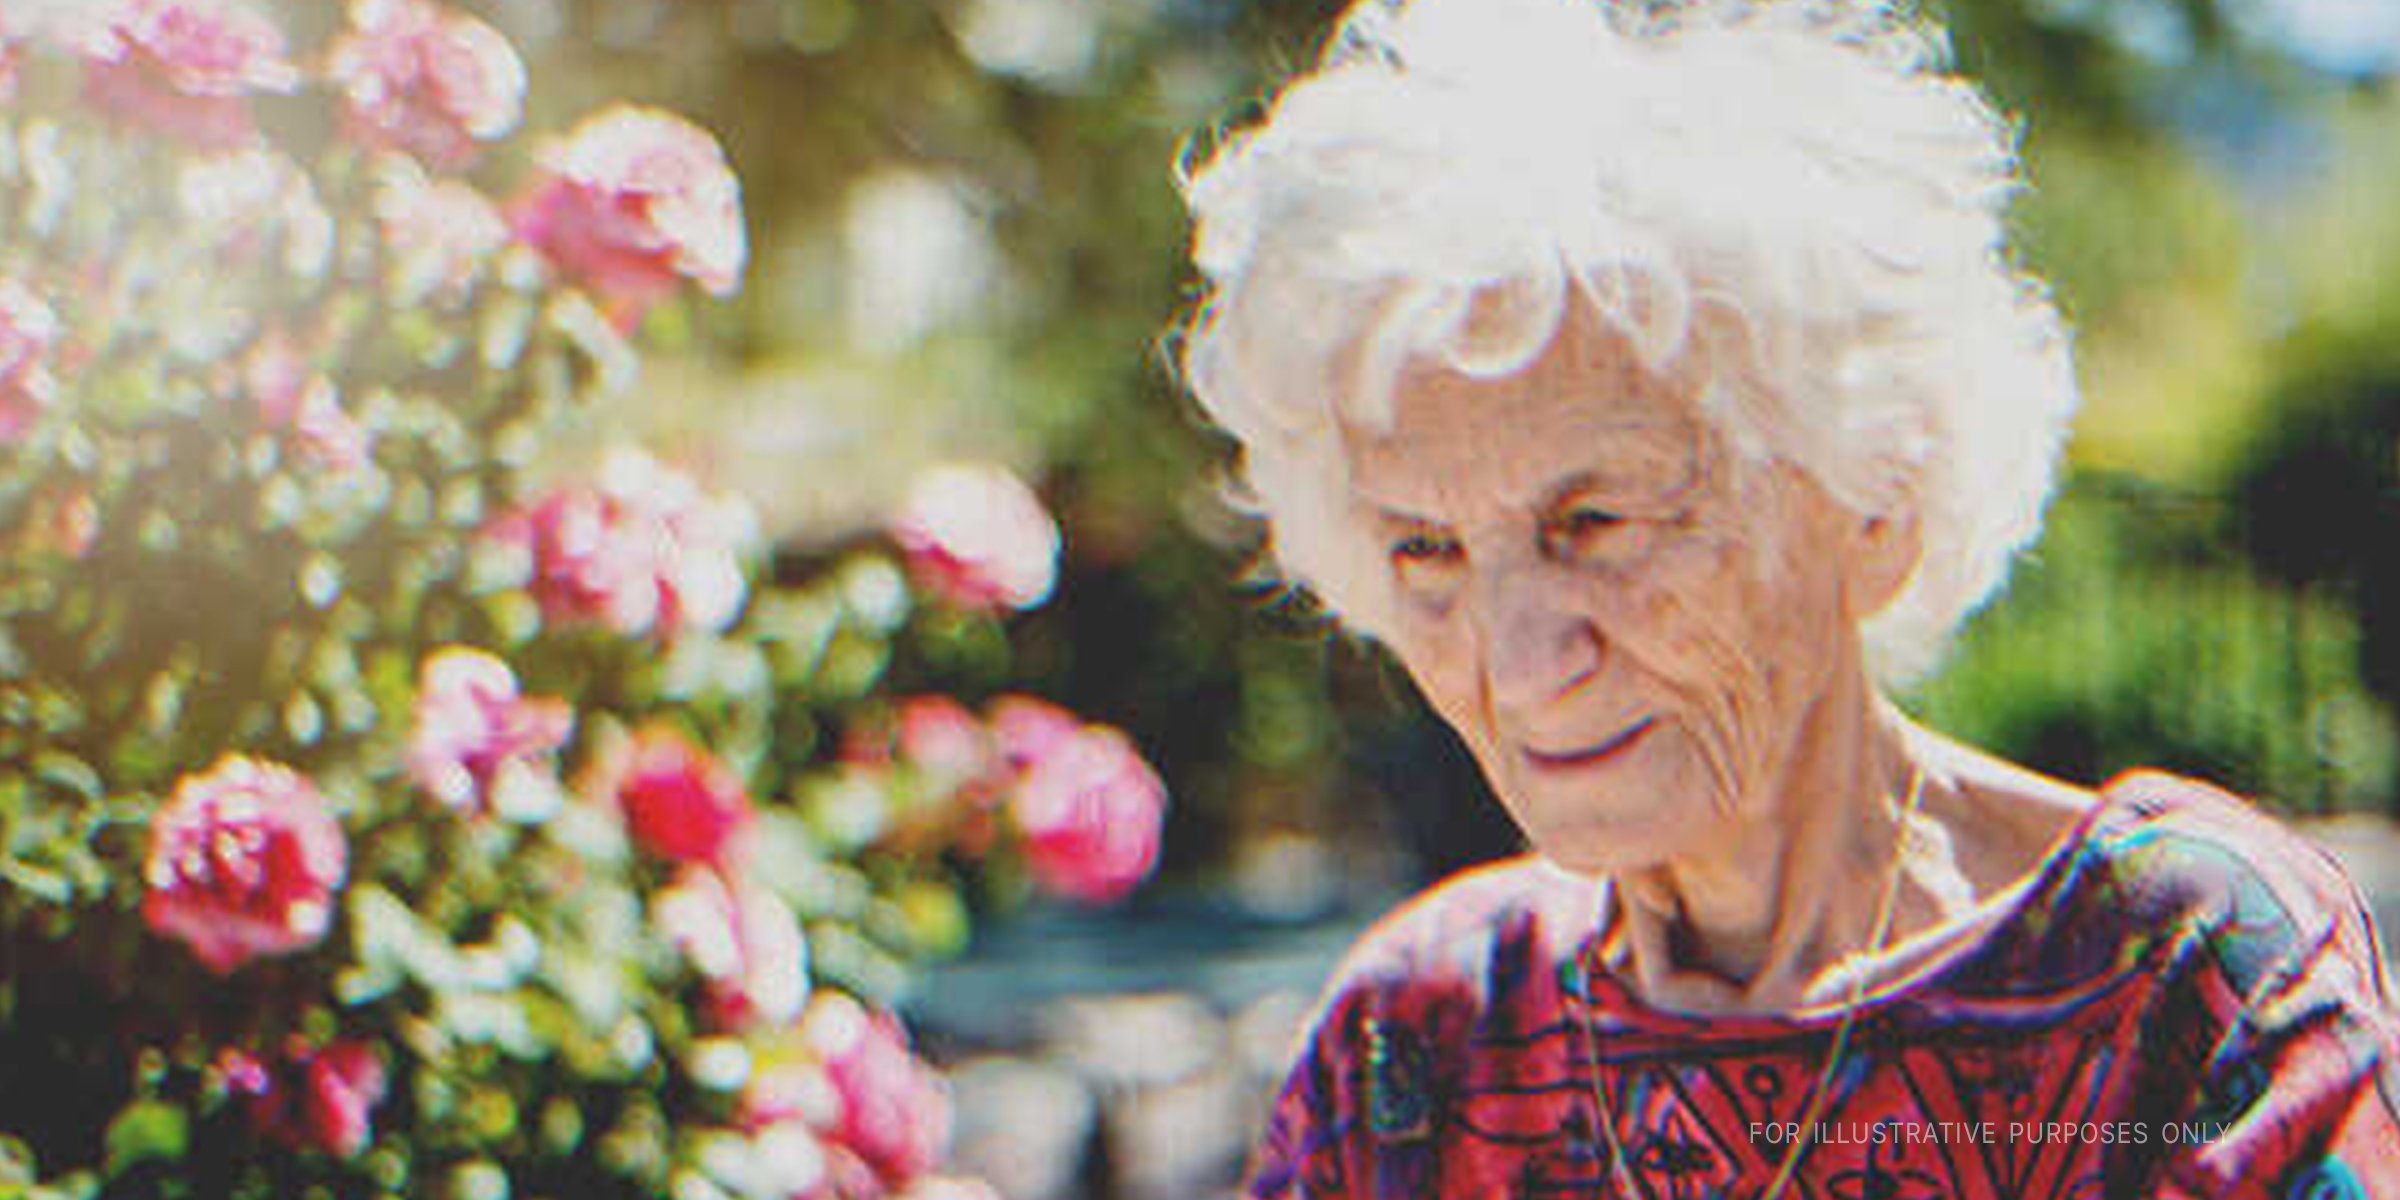 An old woman smiling near flowers. | Source: Getty Images